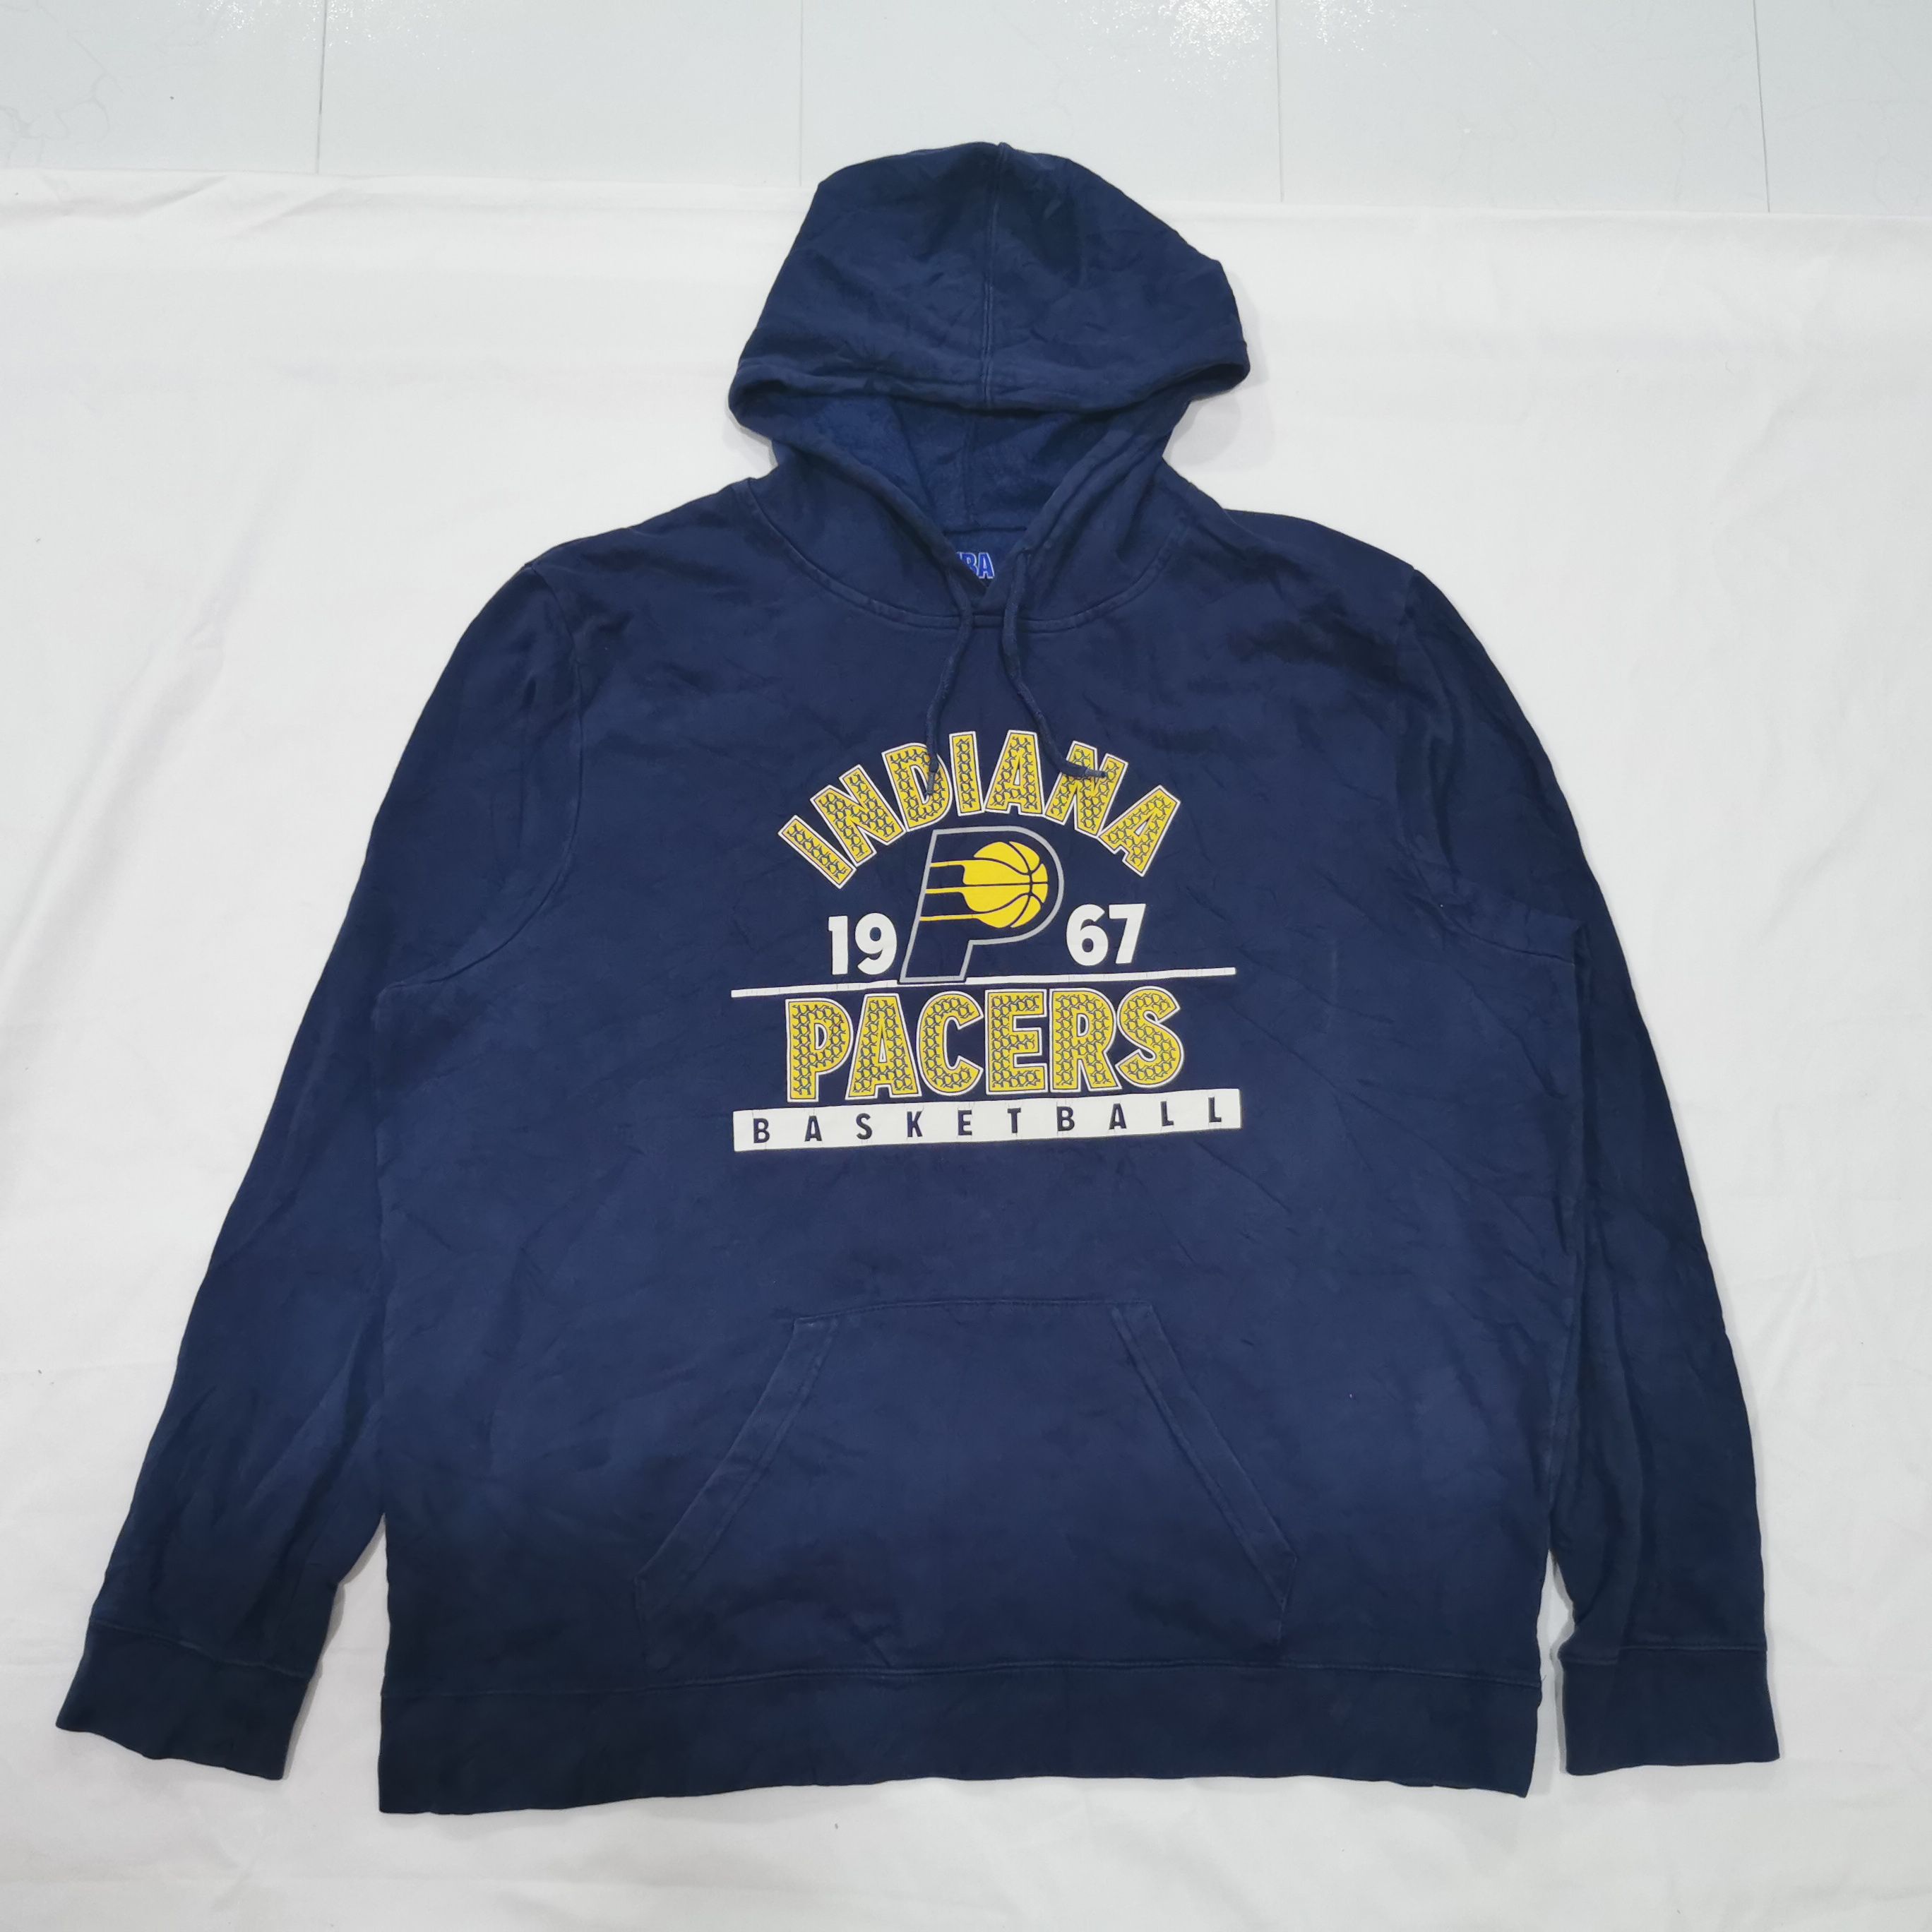 Vintage NBA Indiana Pacers Basketball Oversize Hoodie - 1